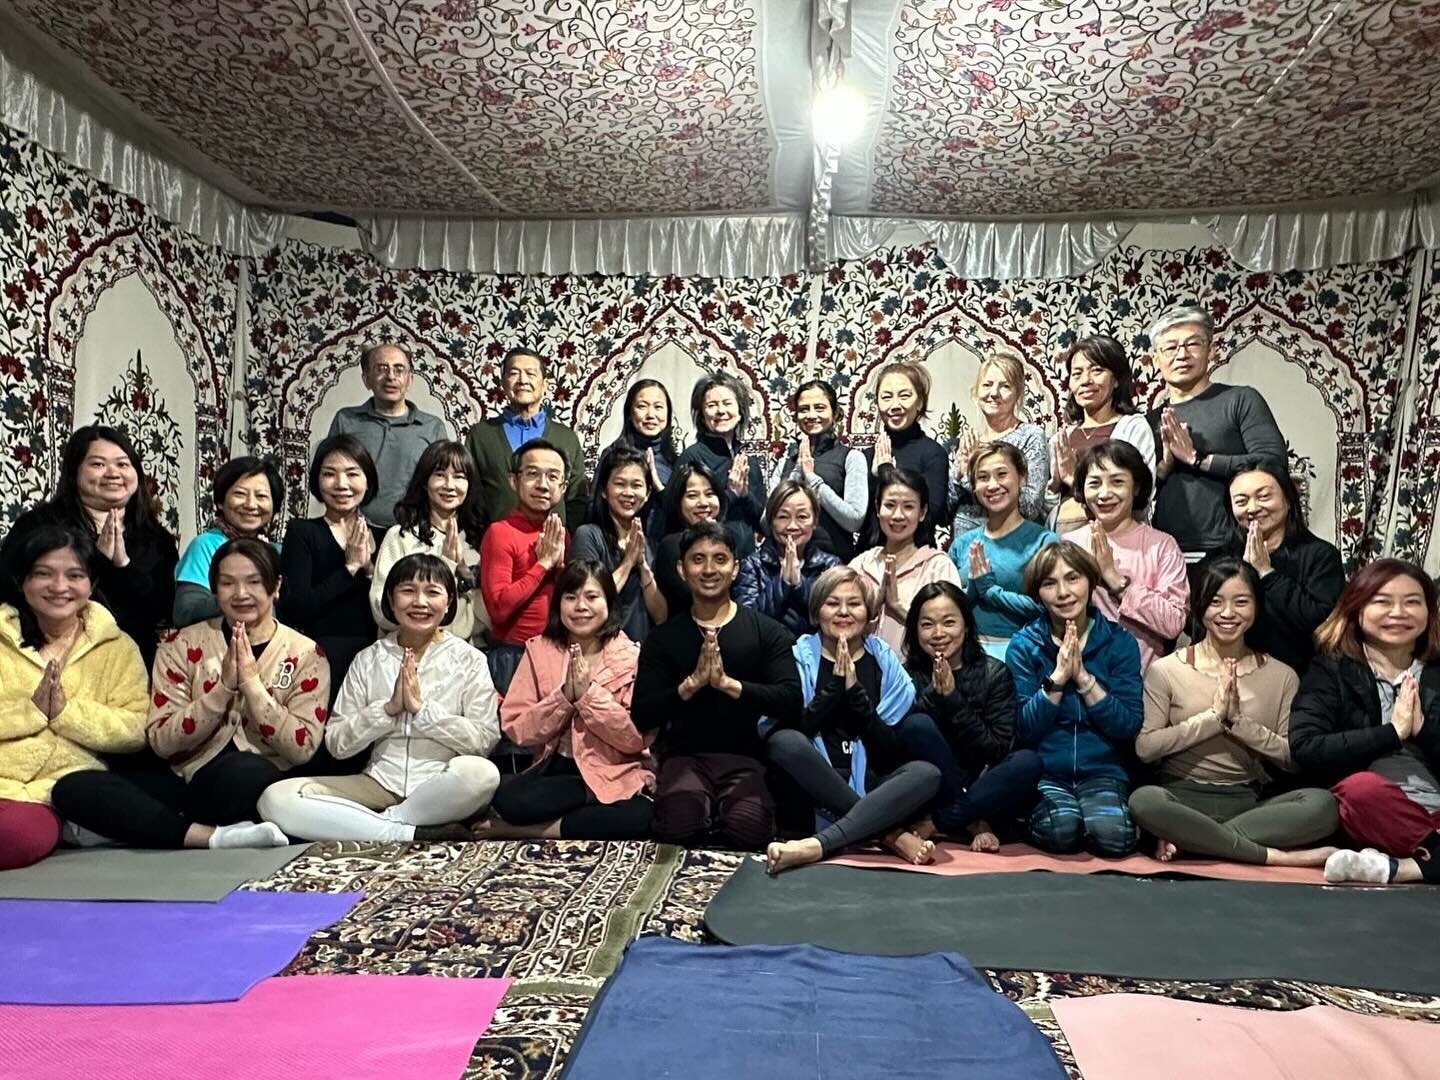 Some of the best memories we shared together in this wonderful #India Yoga Retreat! 🕌💗 As this journey comes to an end, we would like to express our gratitude for your participation and continuous support!

Exciting News! Join us for the next one i